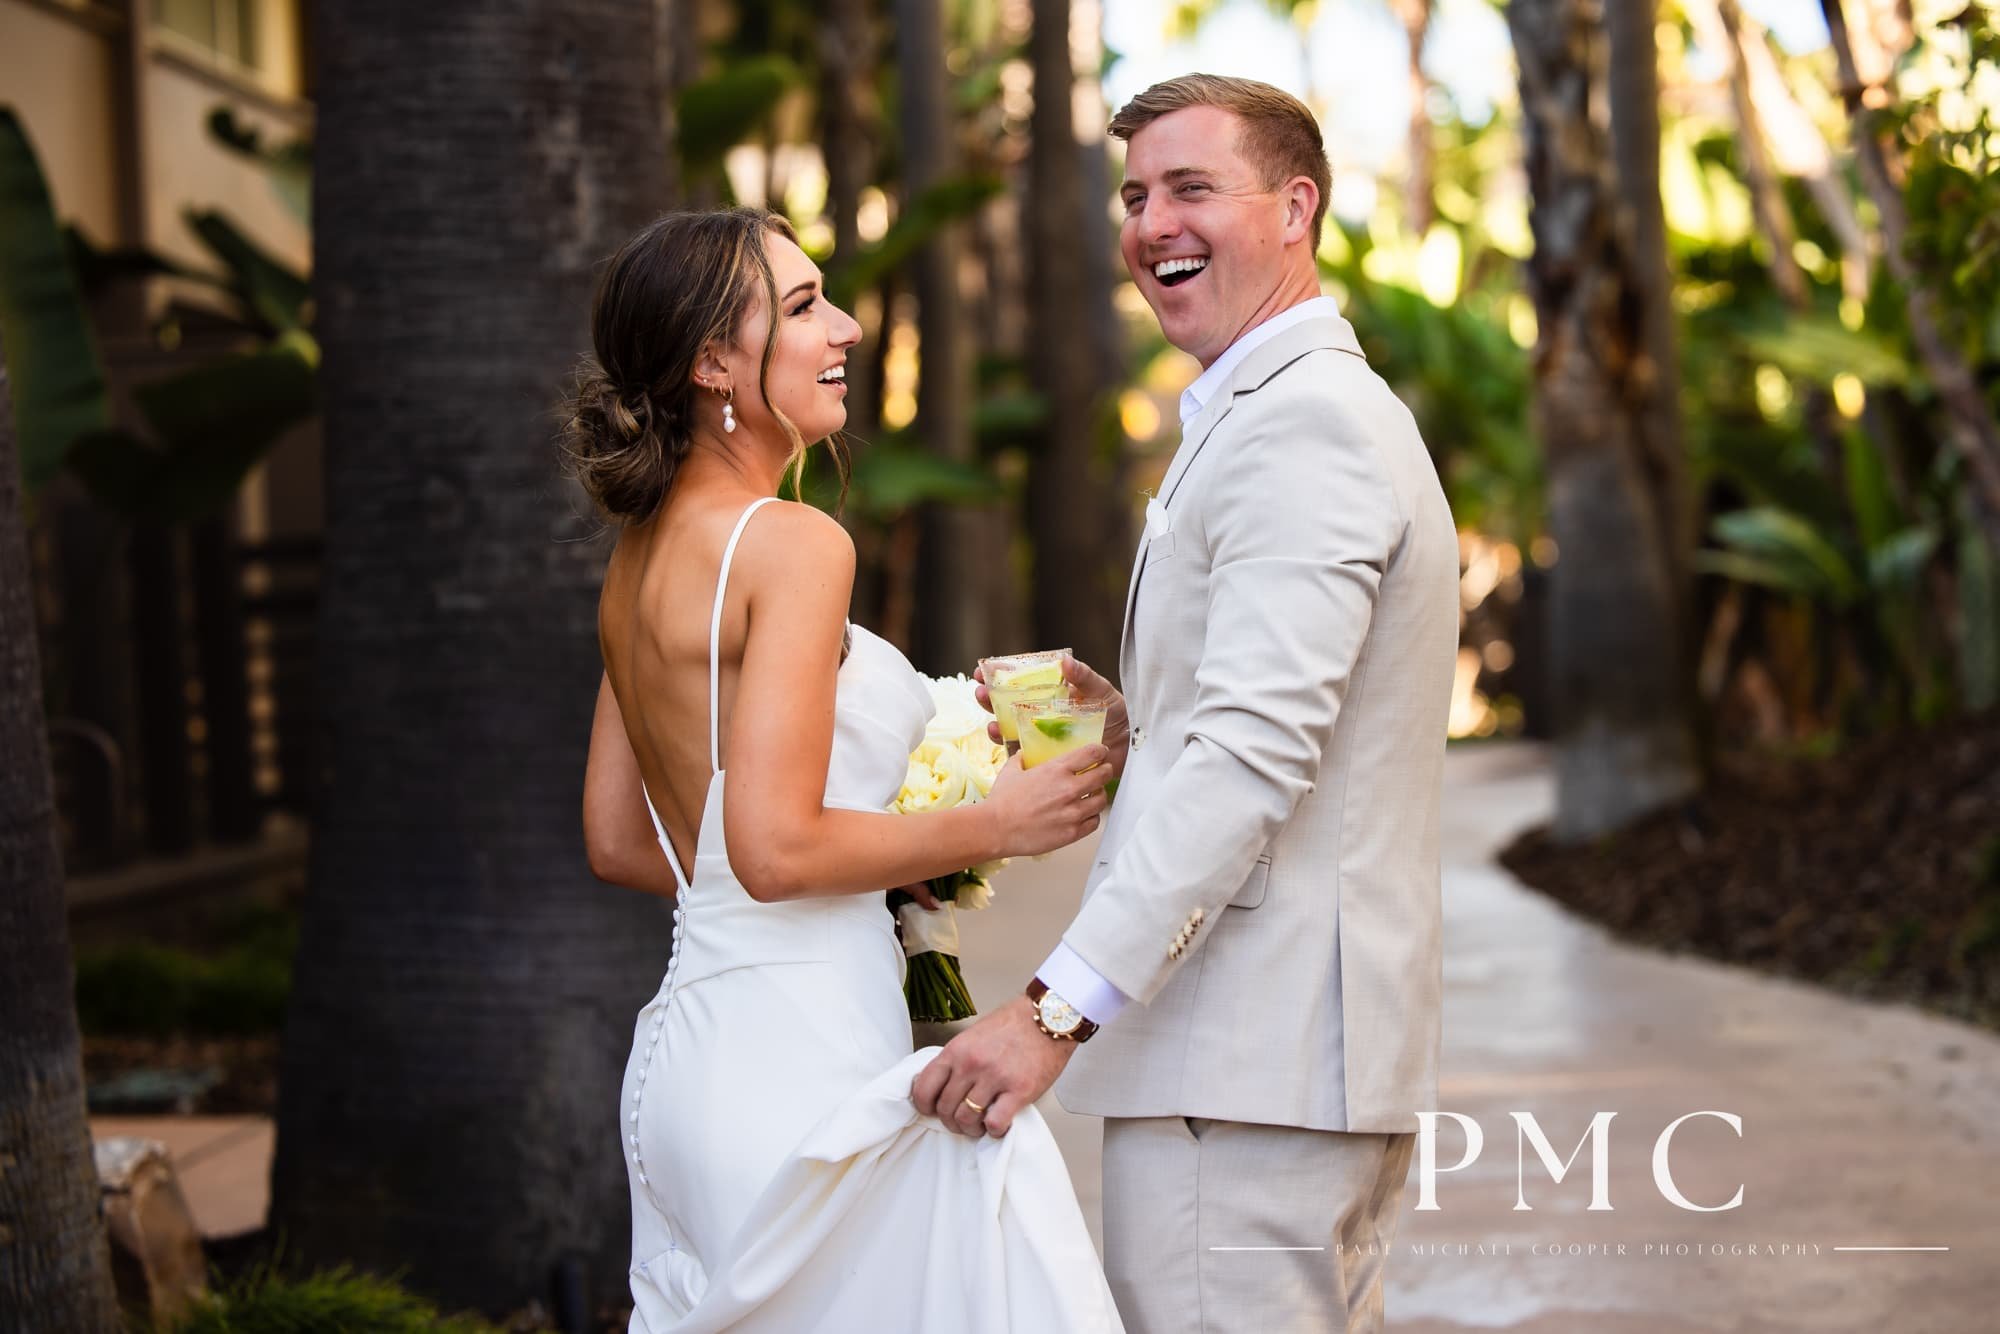 A bride and groom smile as they walk through the Hyatt Regency Mission Bay Resort with their cocktails in their hands.